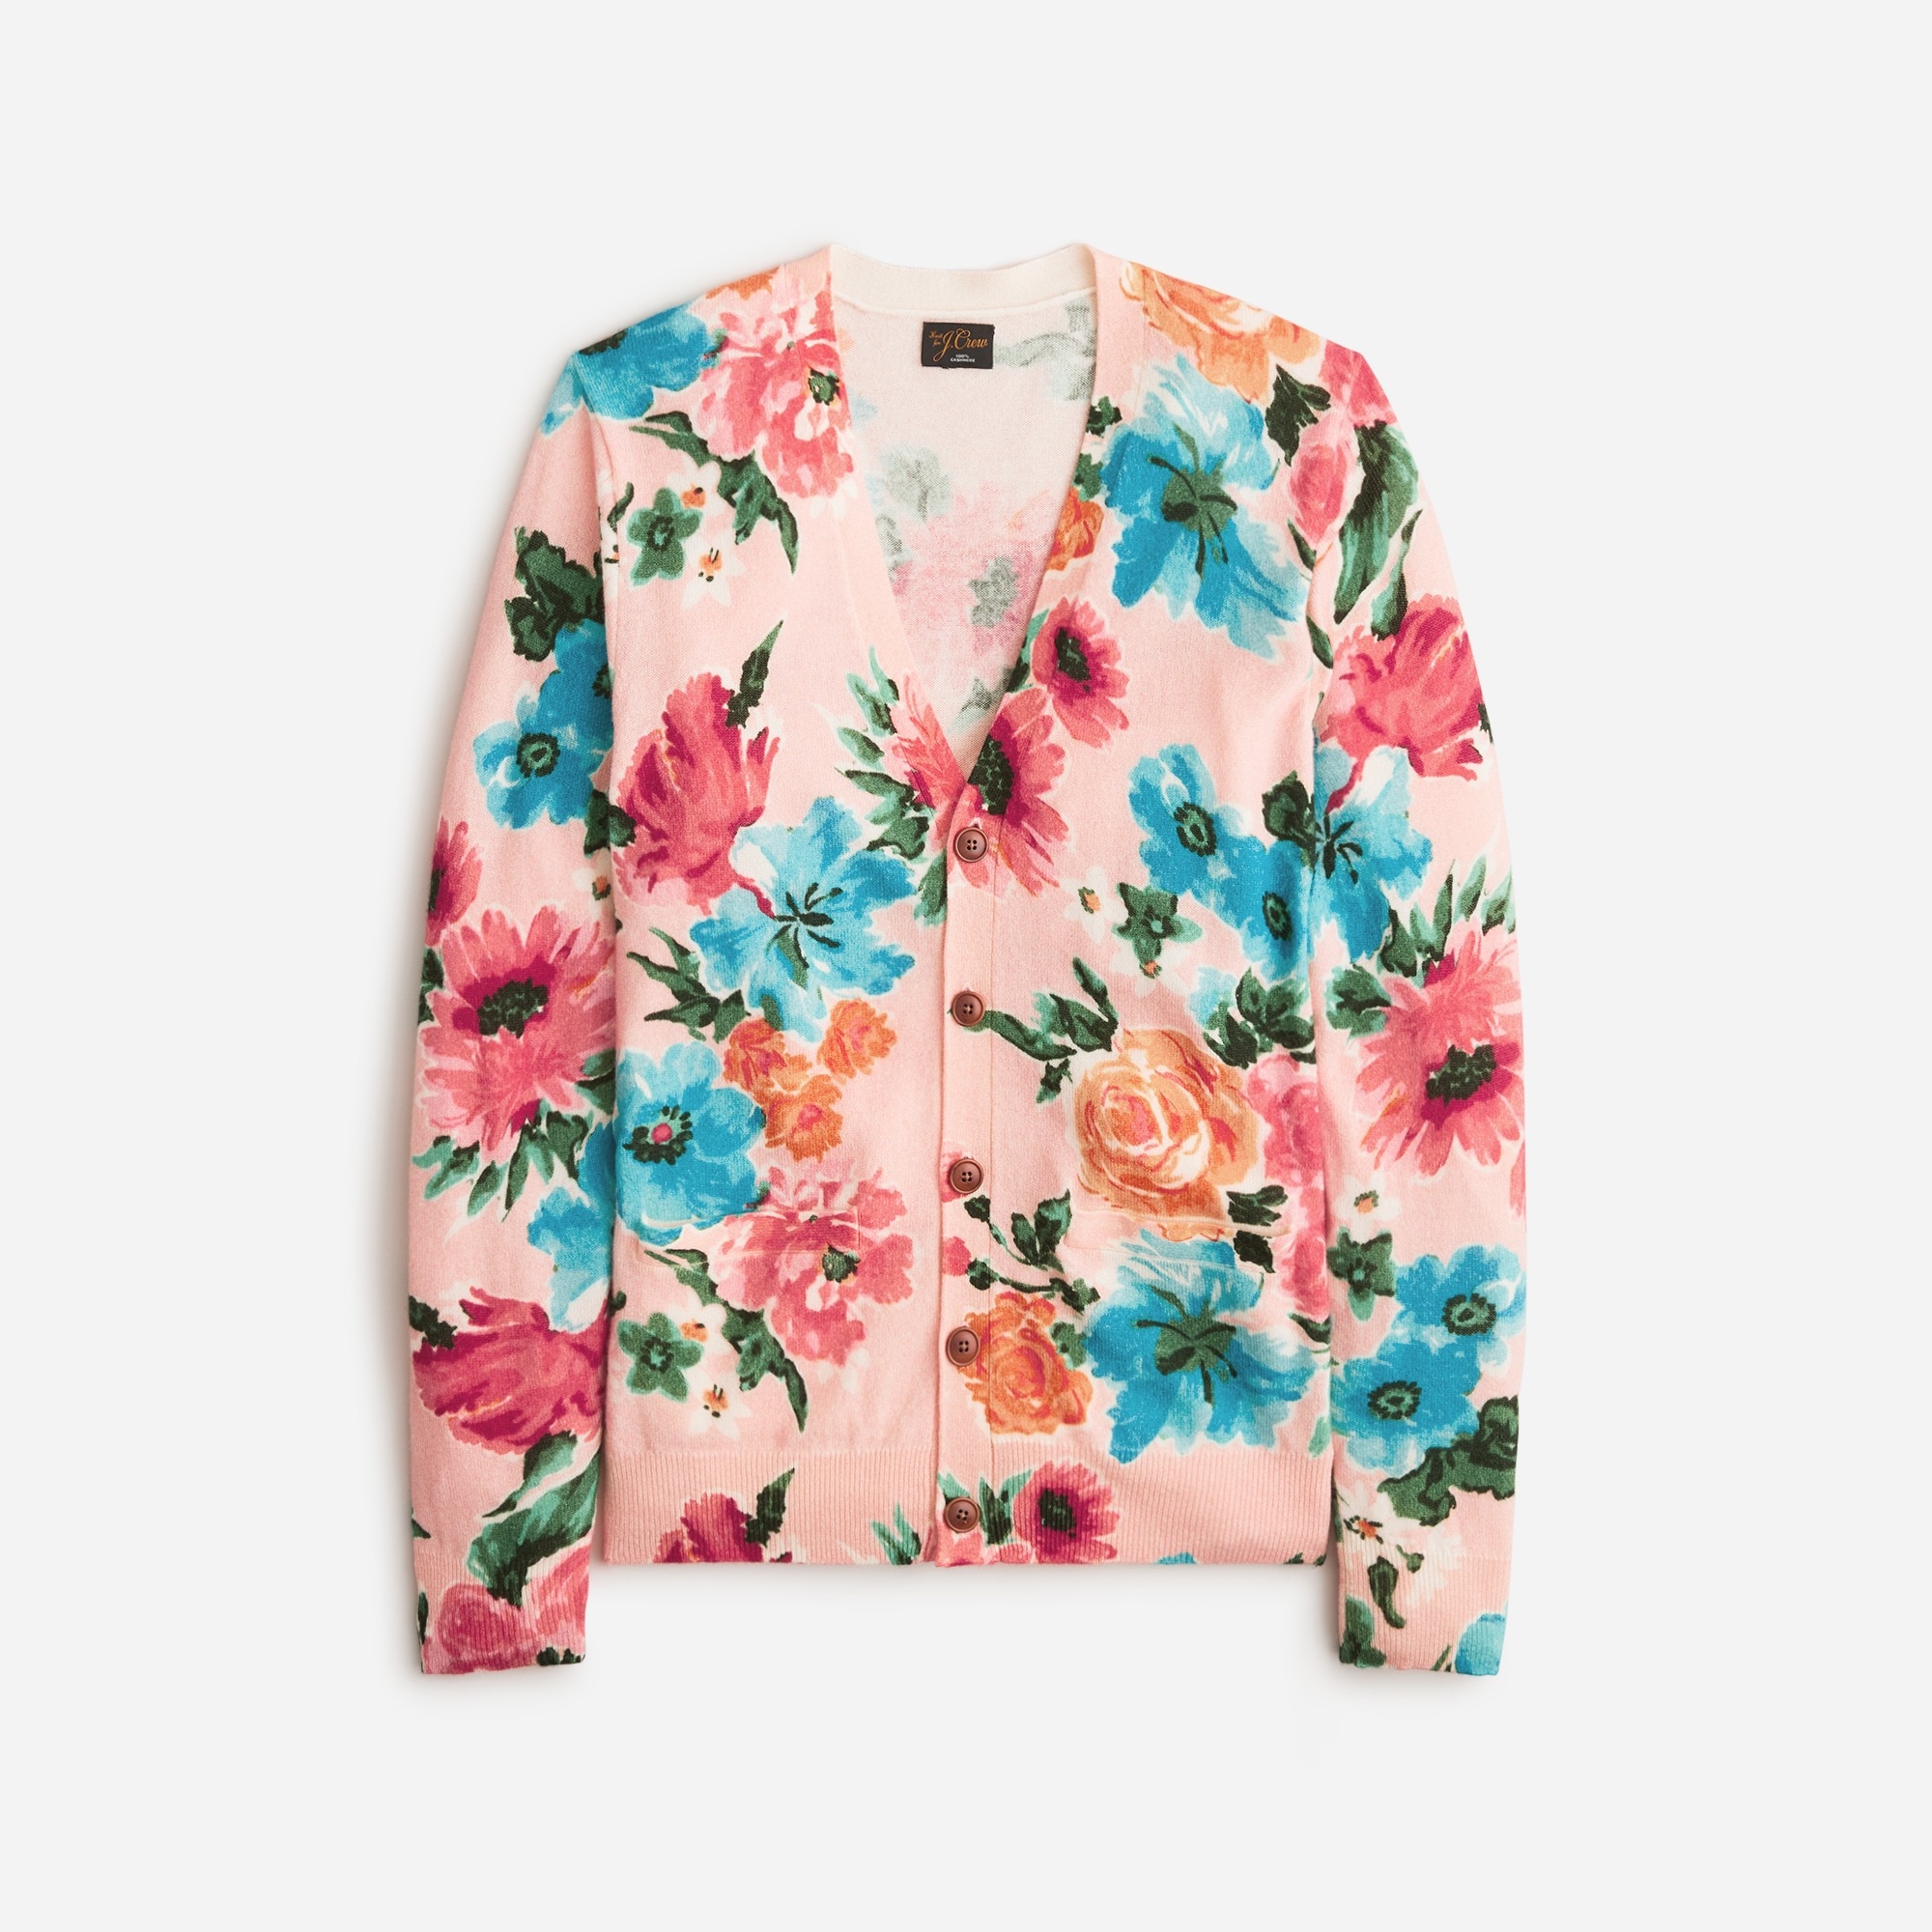 Jcrew Cashmere cardigan sweater in floral print